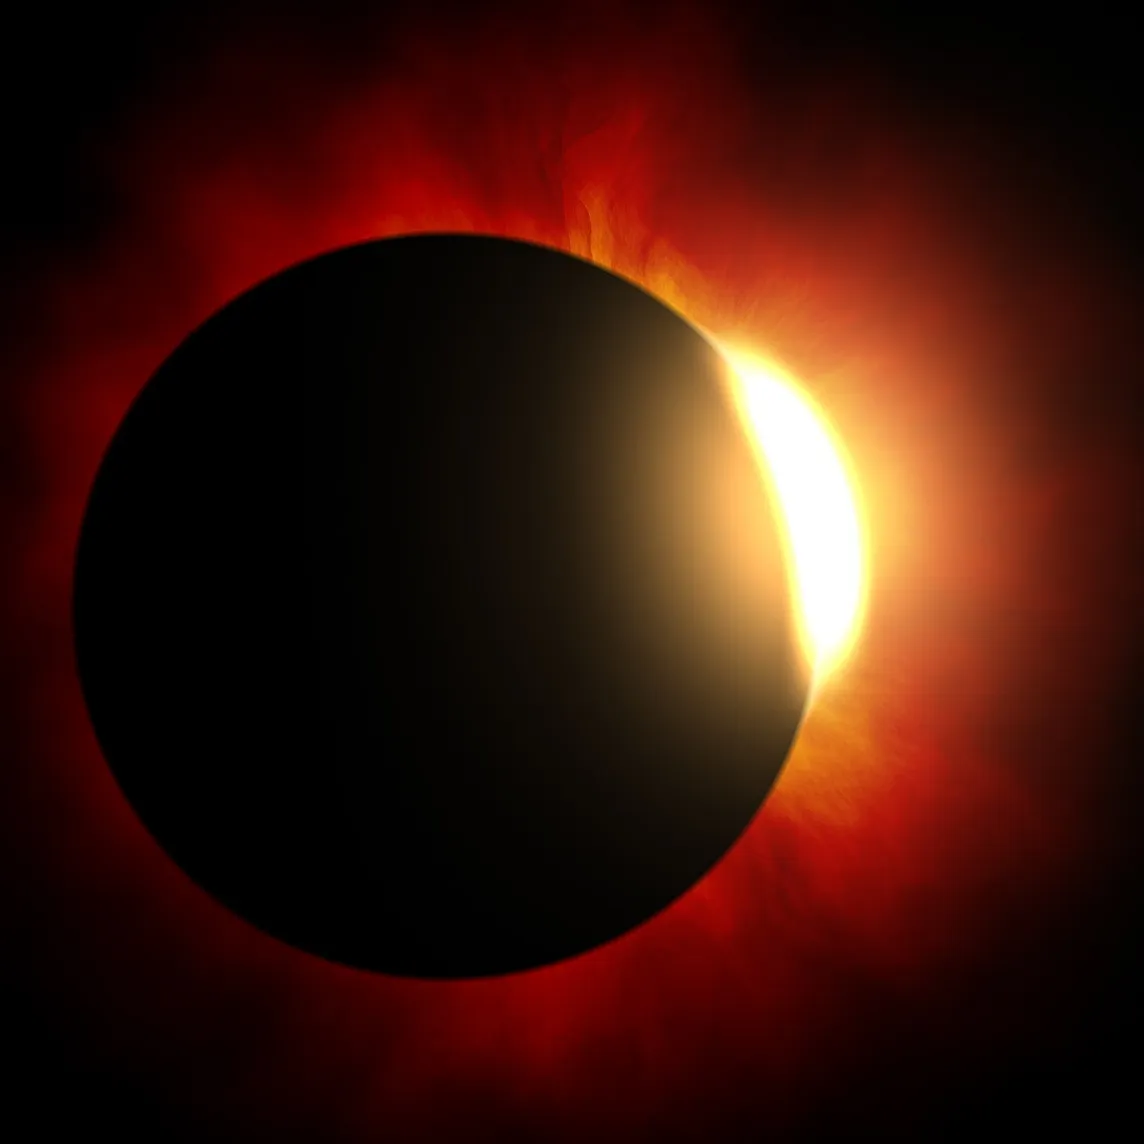 A photo of a solar eclipse — the moon is a dark circle blotting out most of the sun, which peeks out brightly on the top right in a sliver of light.